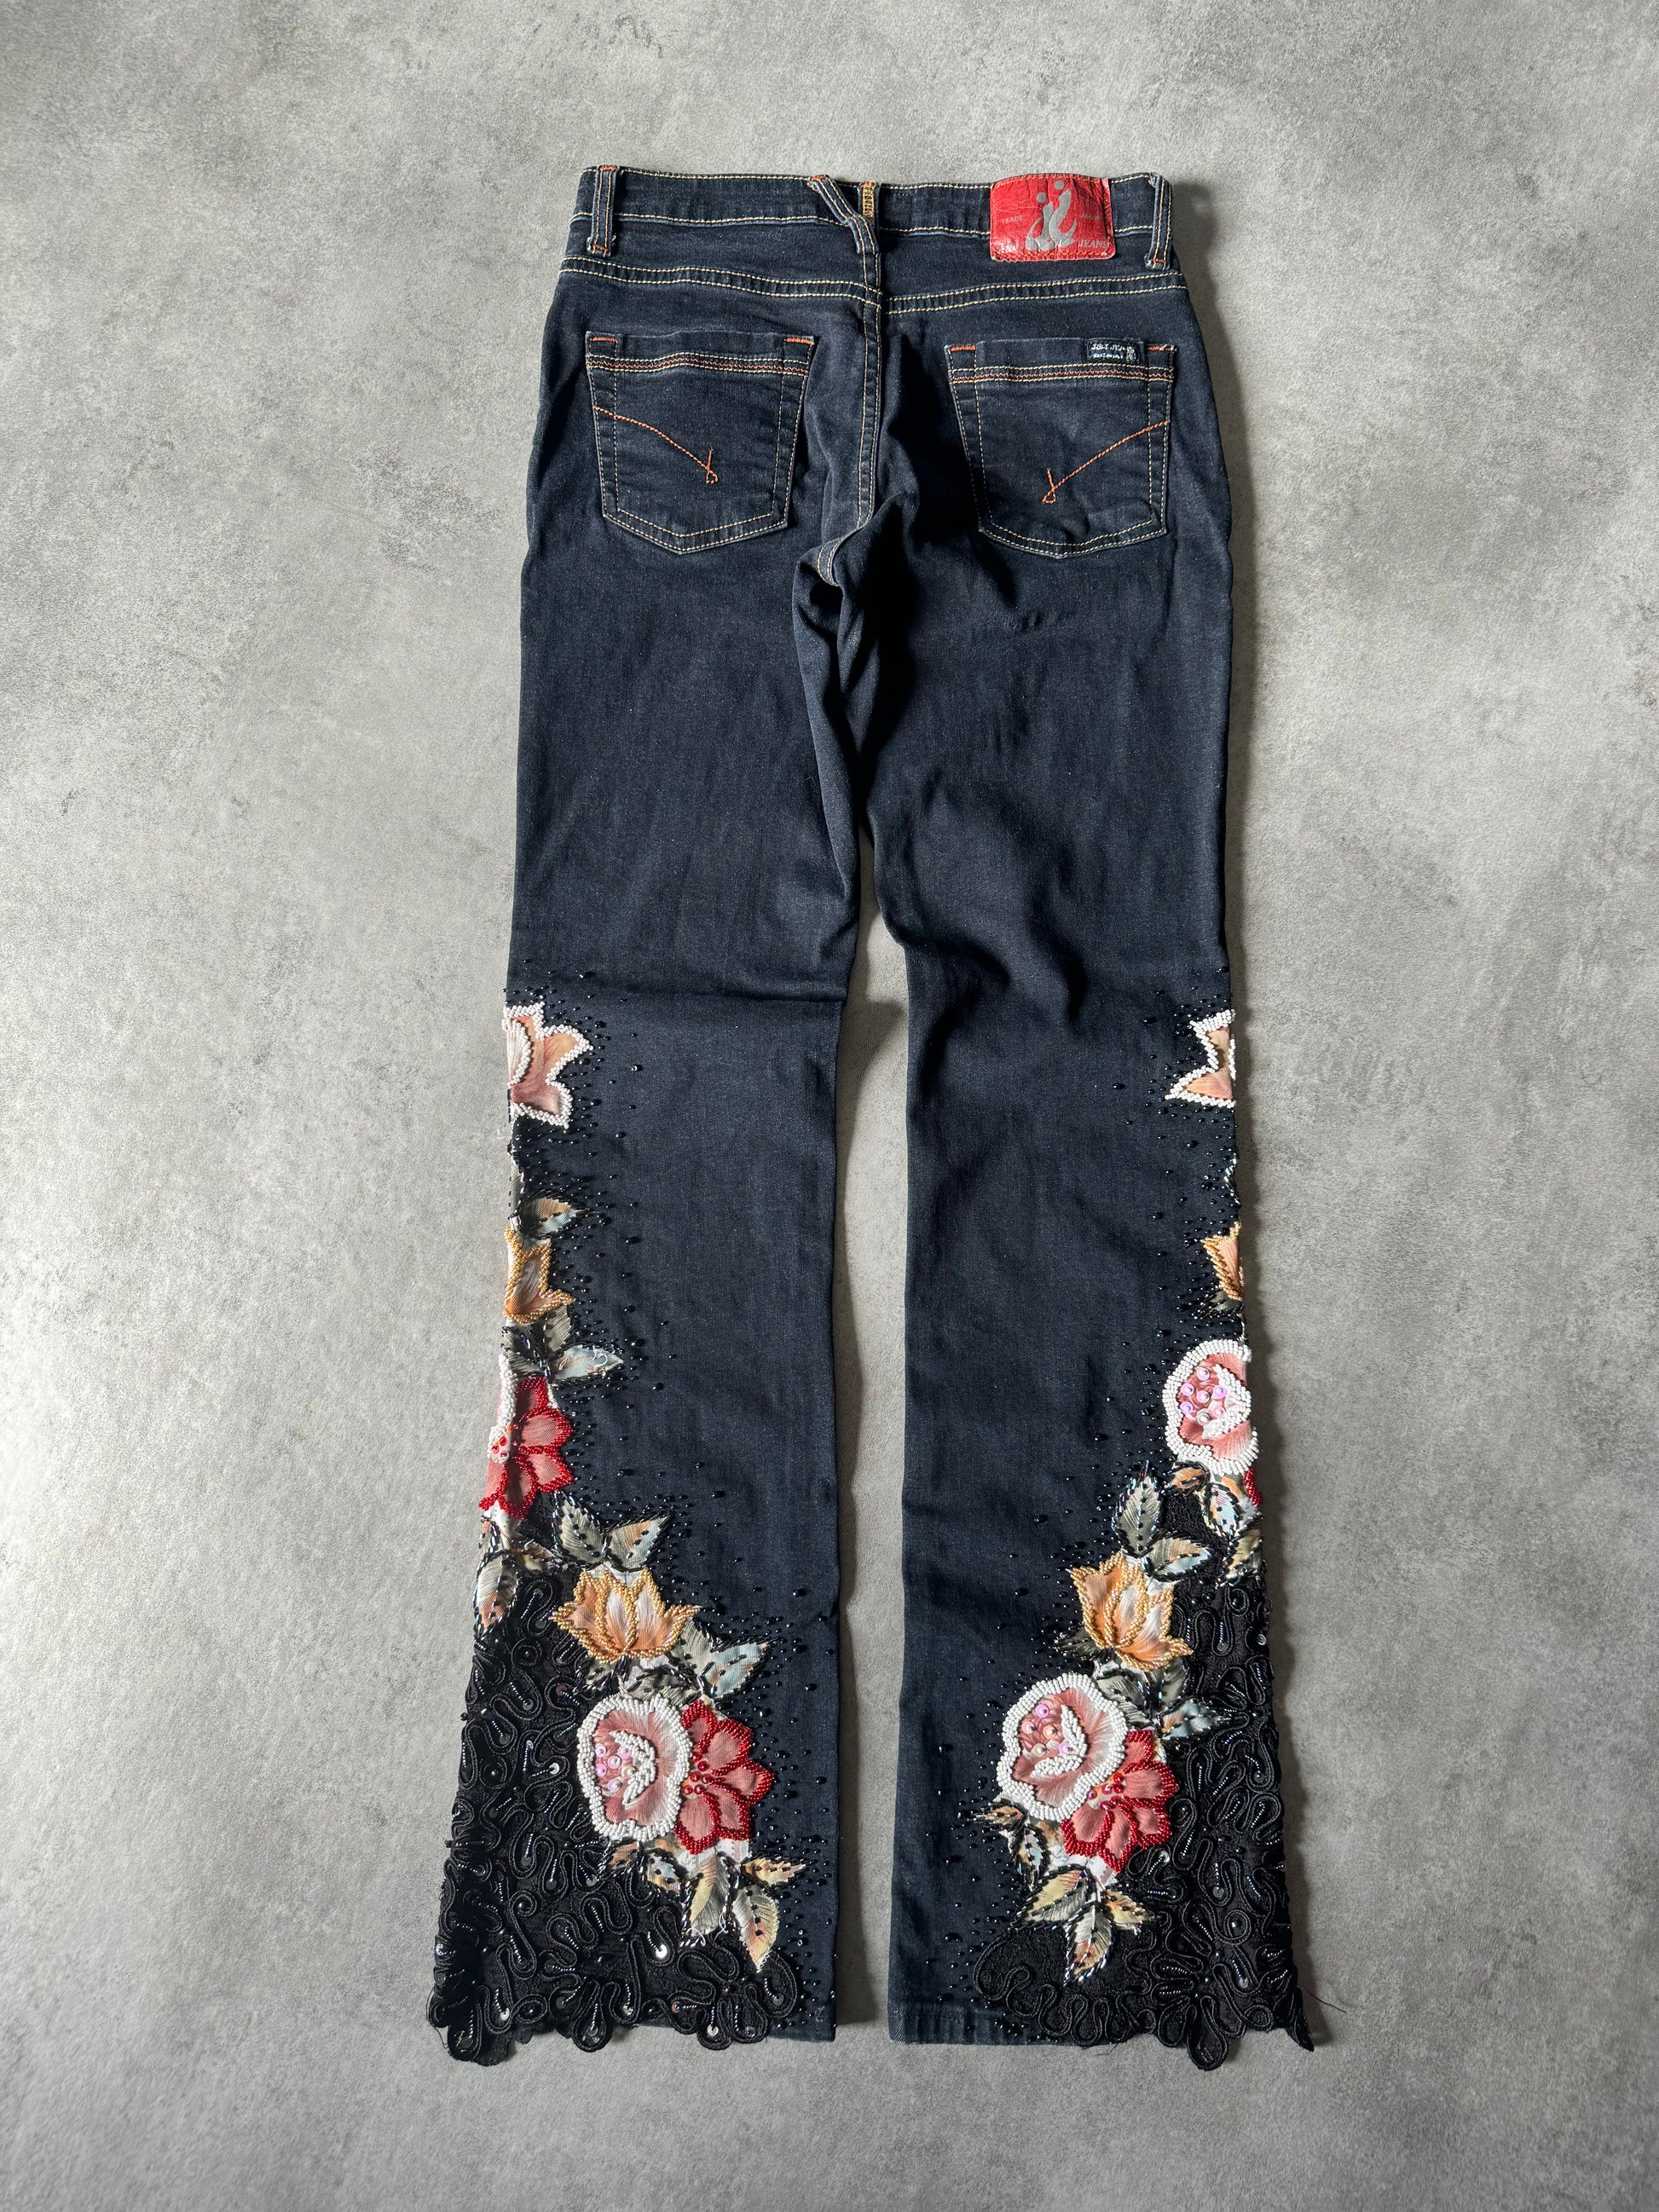 2000s J&J Cowboy Extra Embroidered Pants (XS) - 2